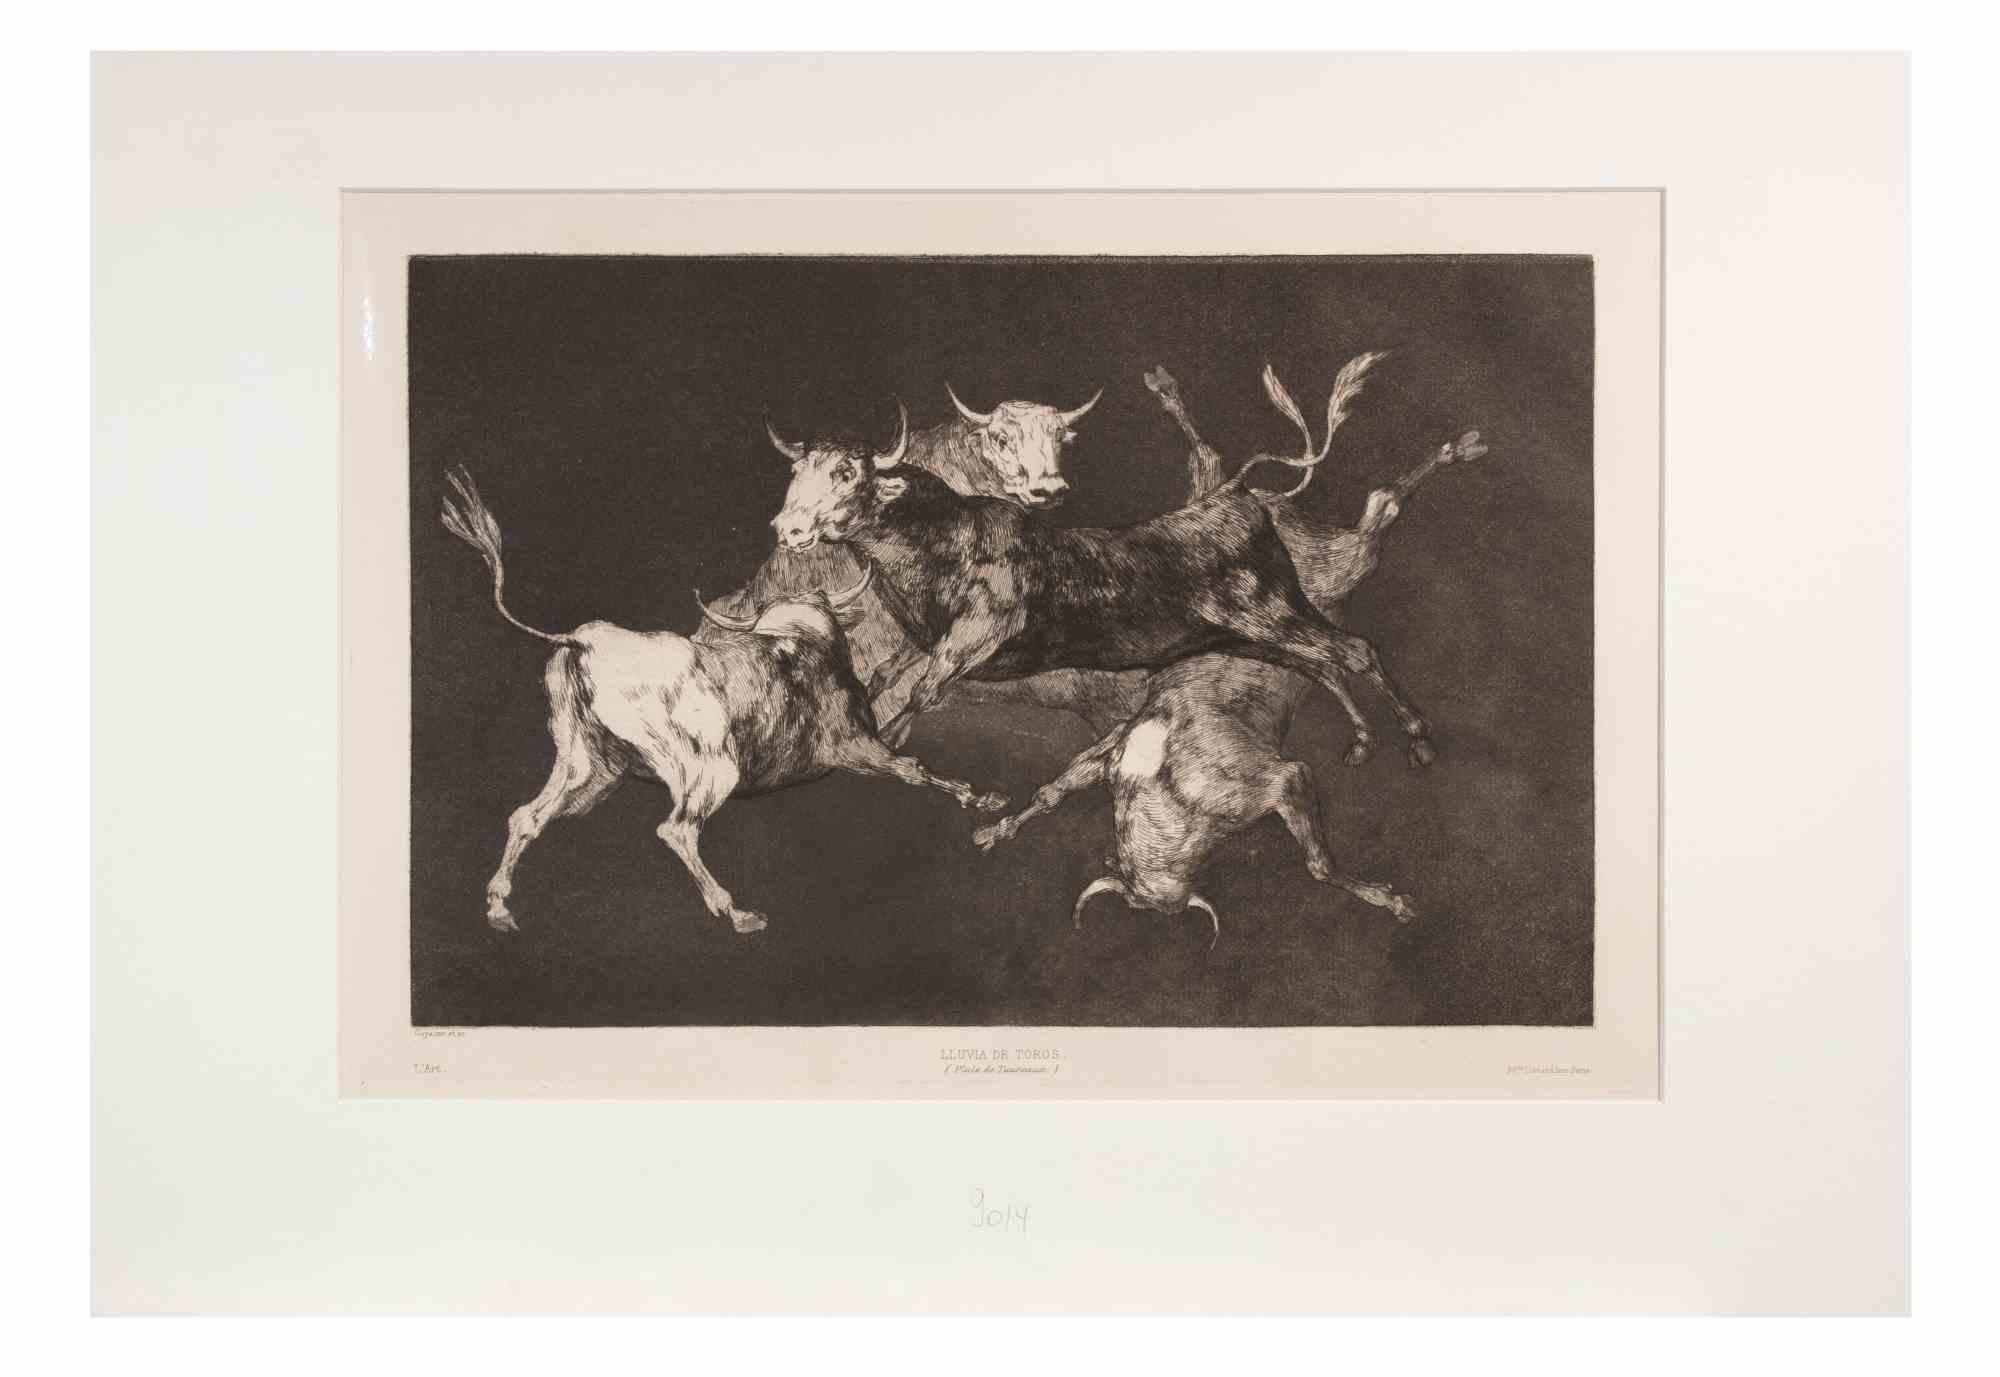 Lluvia de Toros is a  modern artwork realized by Francisco Goya.

Etching and Aquatint, from the Series "Los Proverbios", realized in 1815.

This copy belongs to the edition of "L'Art", published in 1877.

Very good condition.